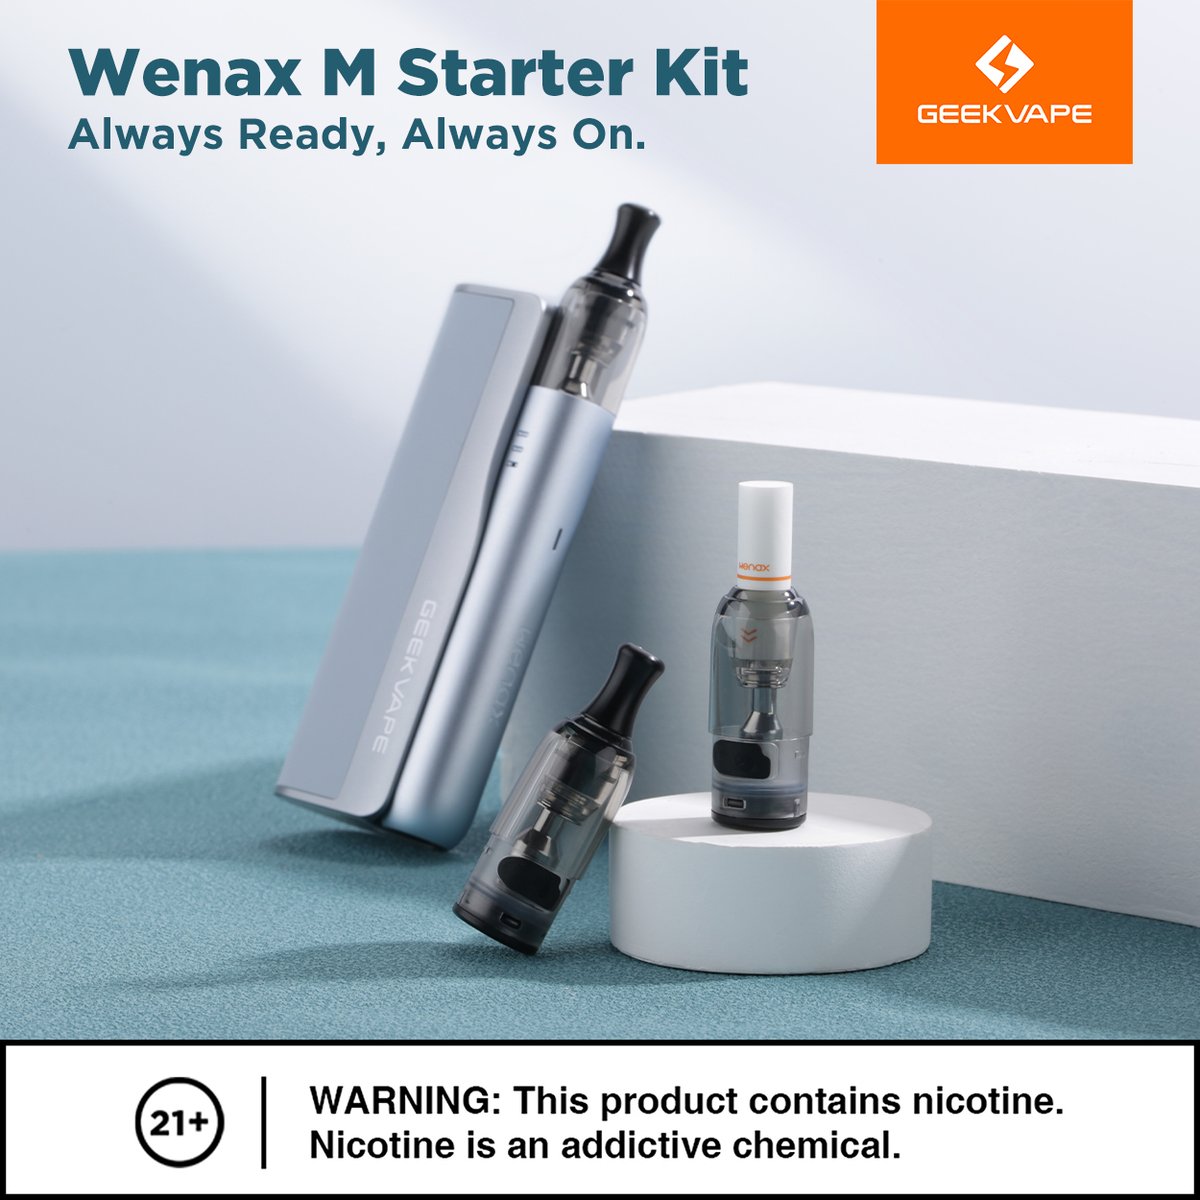 Experience the next level of vaping freedom with the Wenax M Starter Kit. Its compact design houses a powerful 00mAh battery, while the adjustable airflow system lets you customize each puff. Plus, it's coil-compatible for versatility in flavors. 💨✨ #geekvape #geekvapetech